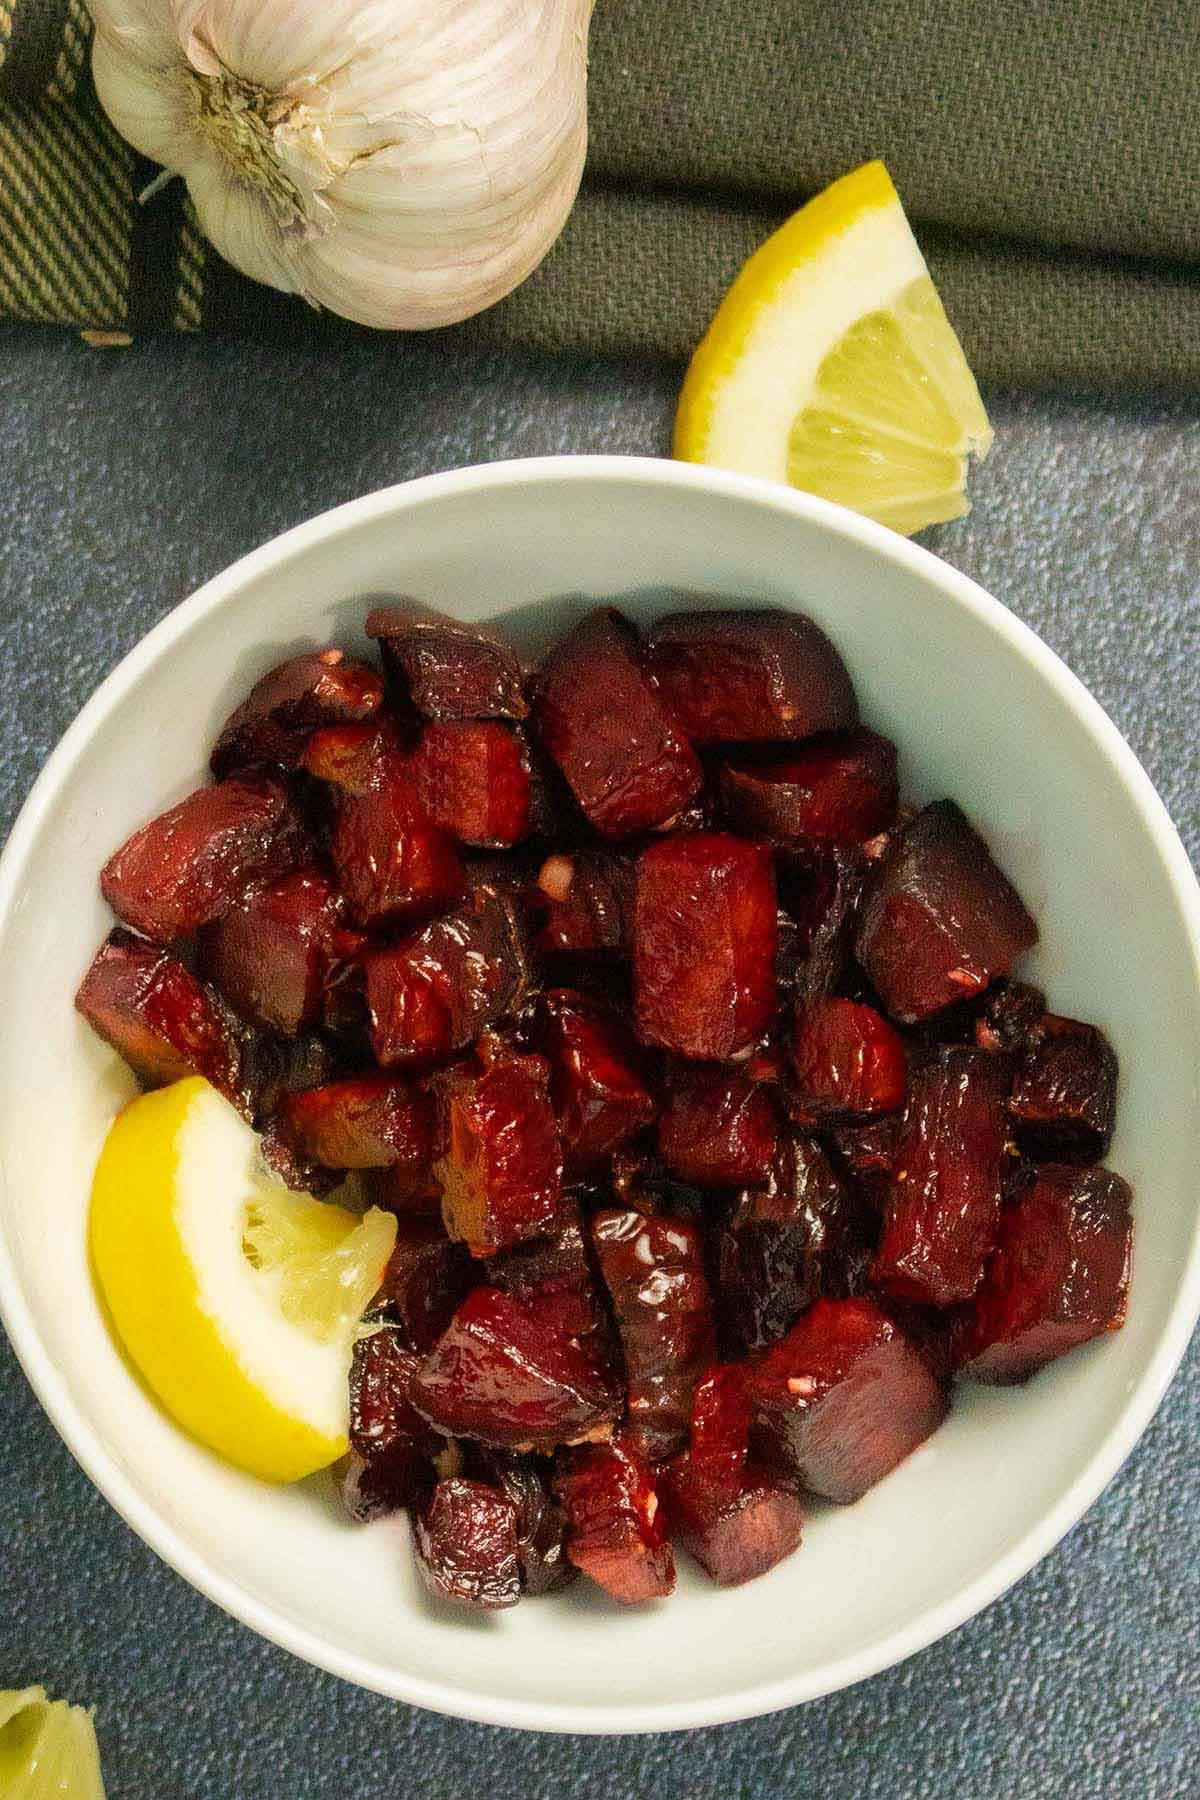 air fryer beets with a lemon wedge in a white bowl